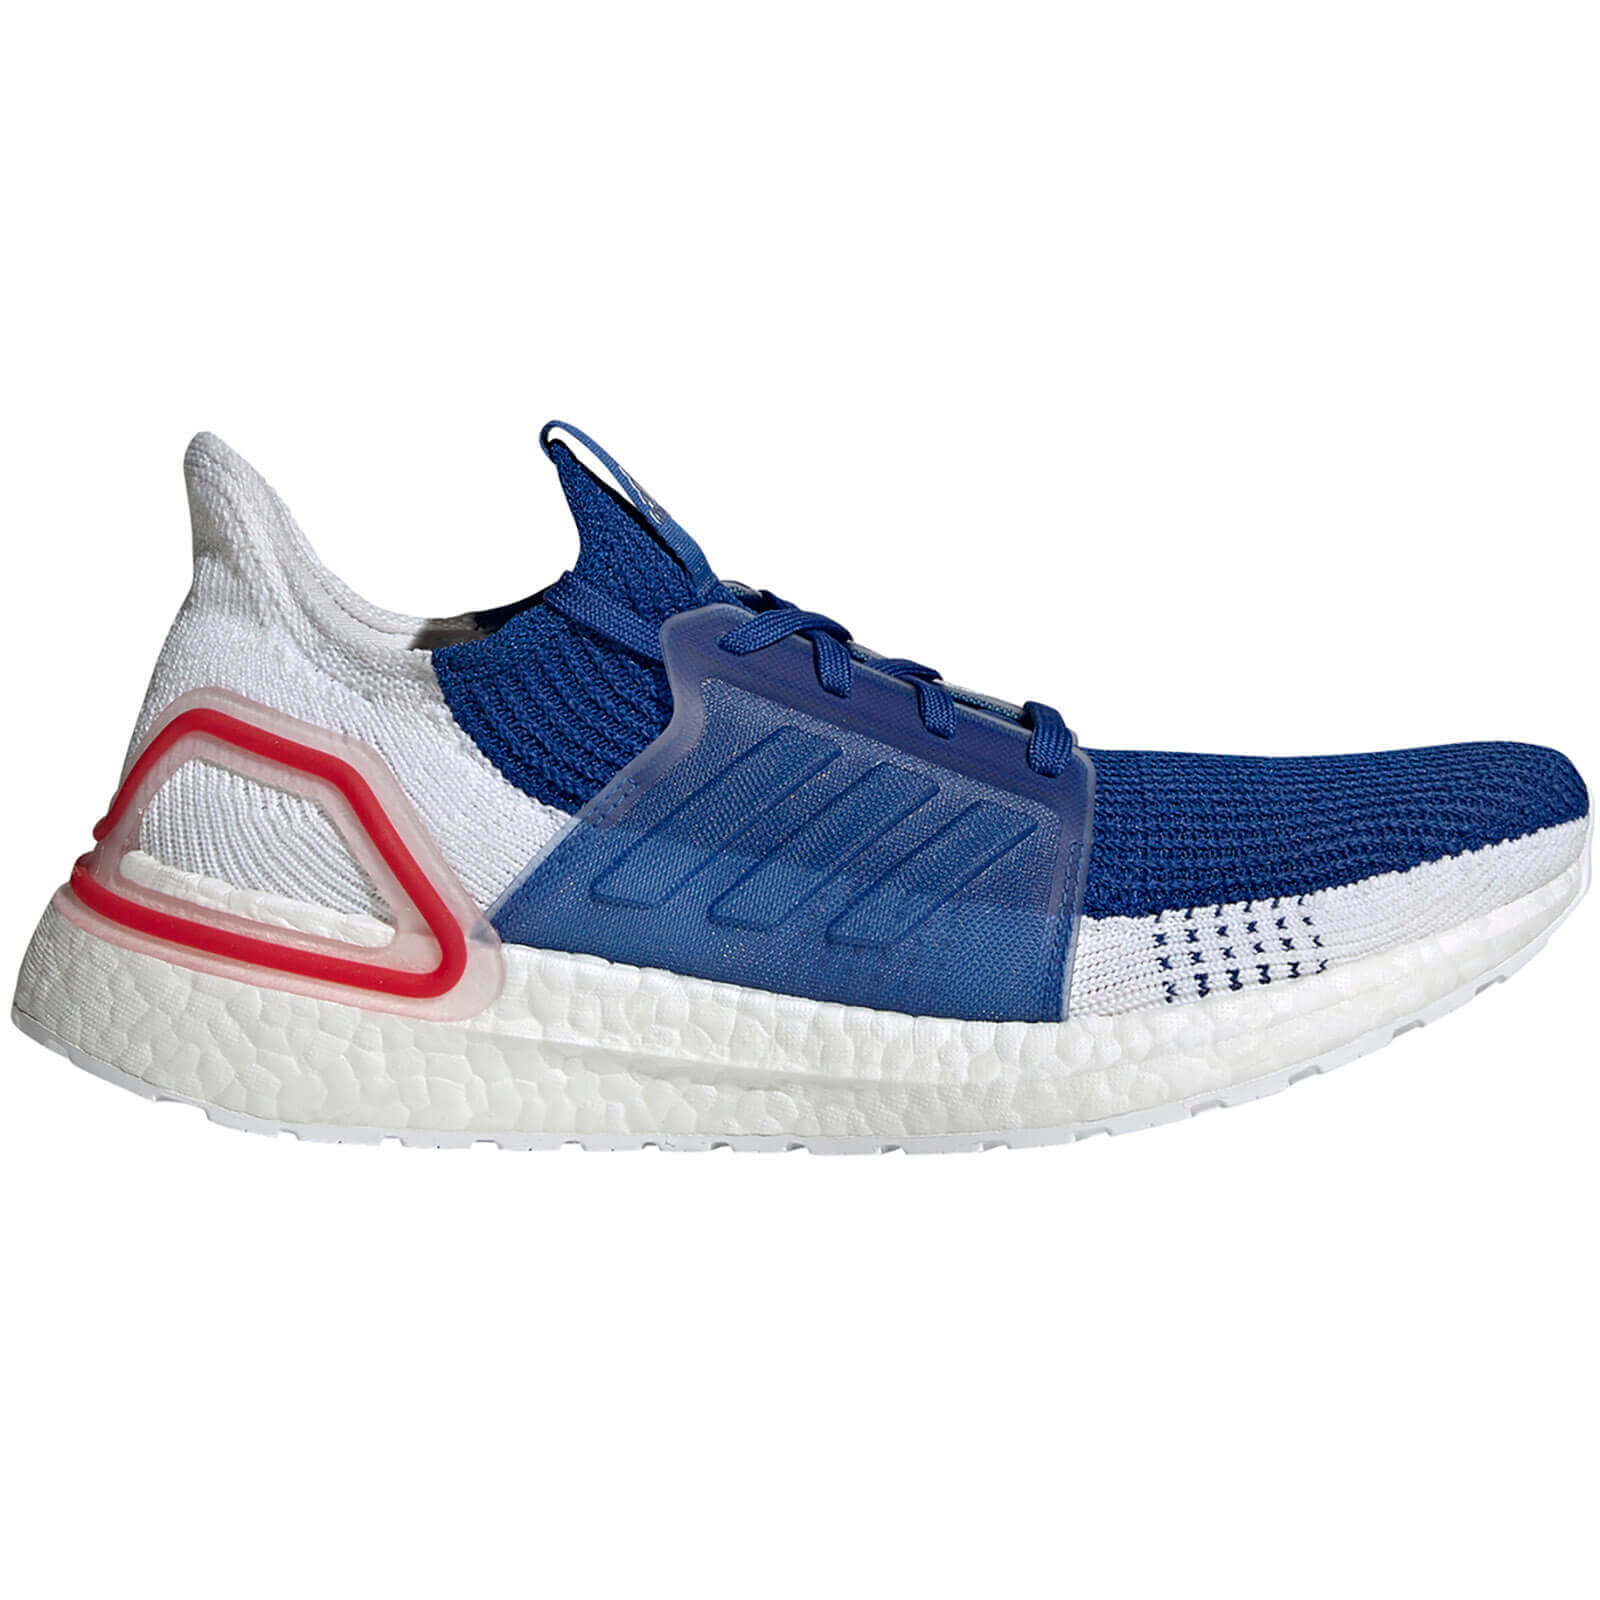 adidas Ultra Boost 19 Running Shoes - White/Blue | ProBikeKit Canada